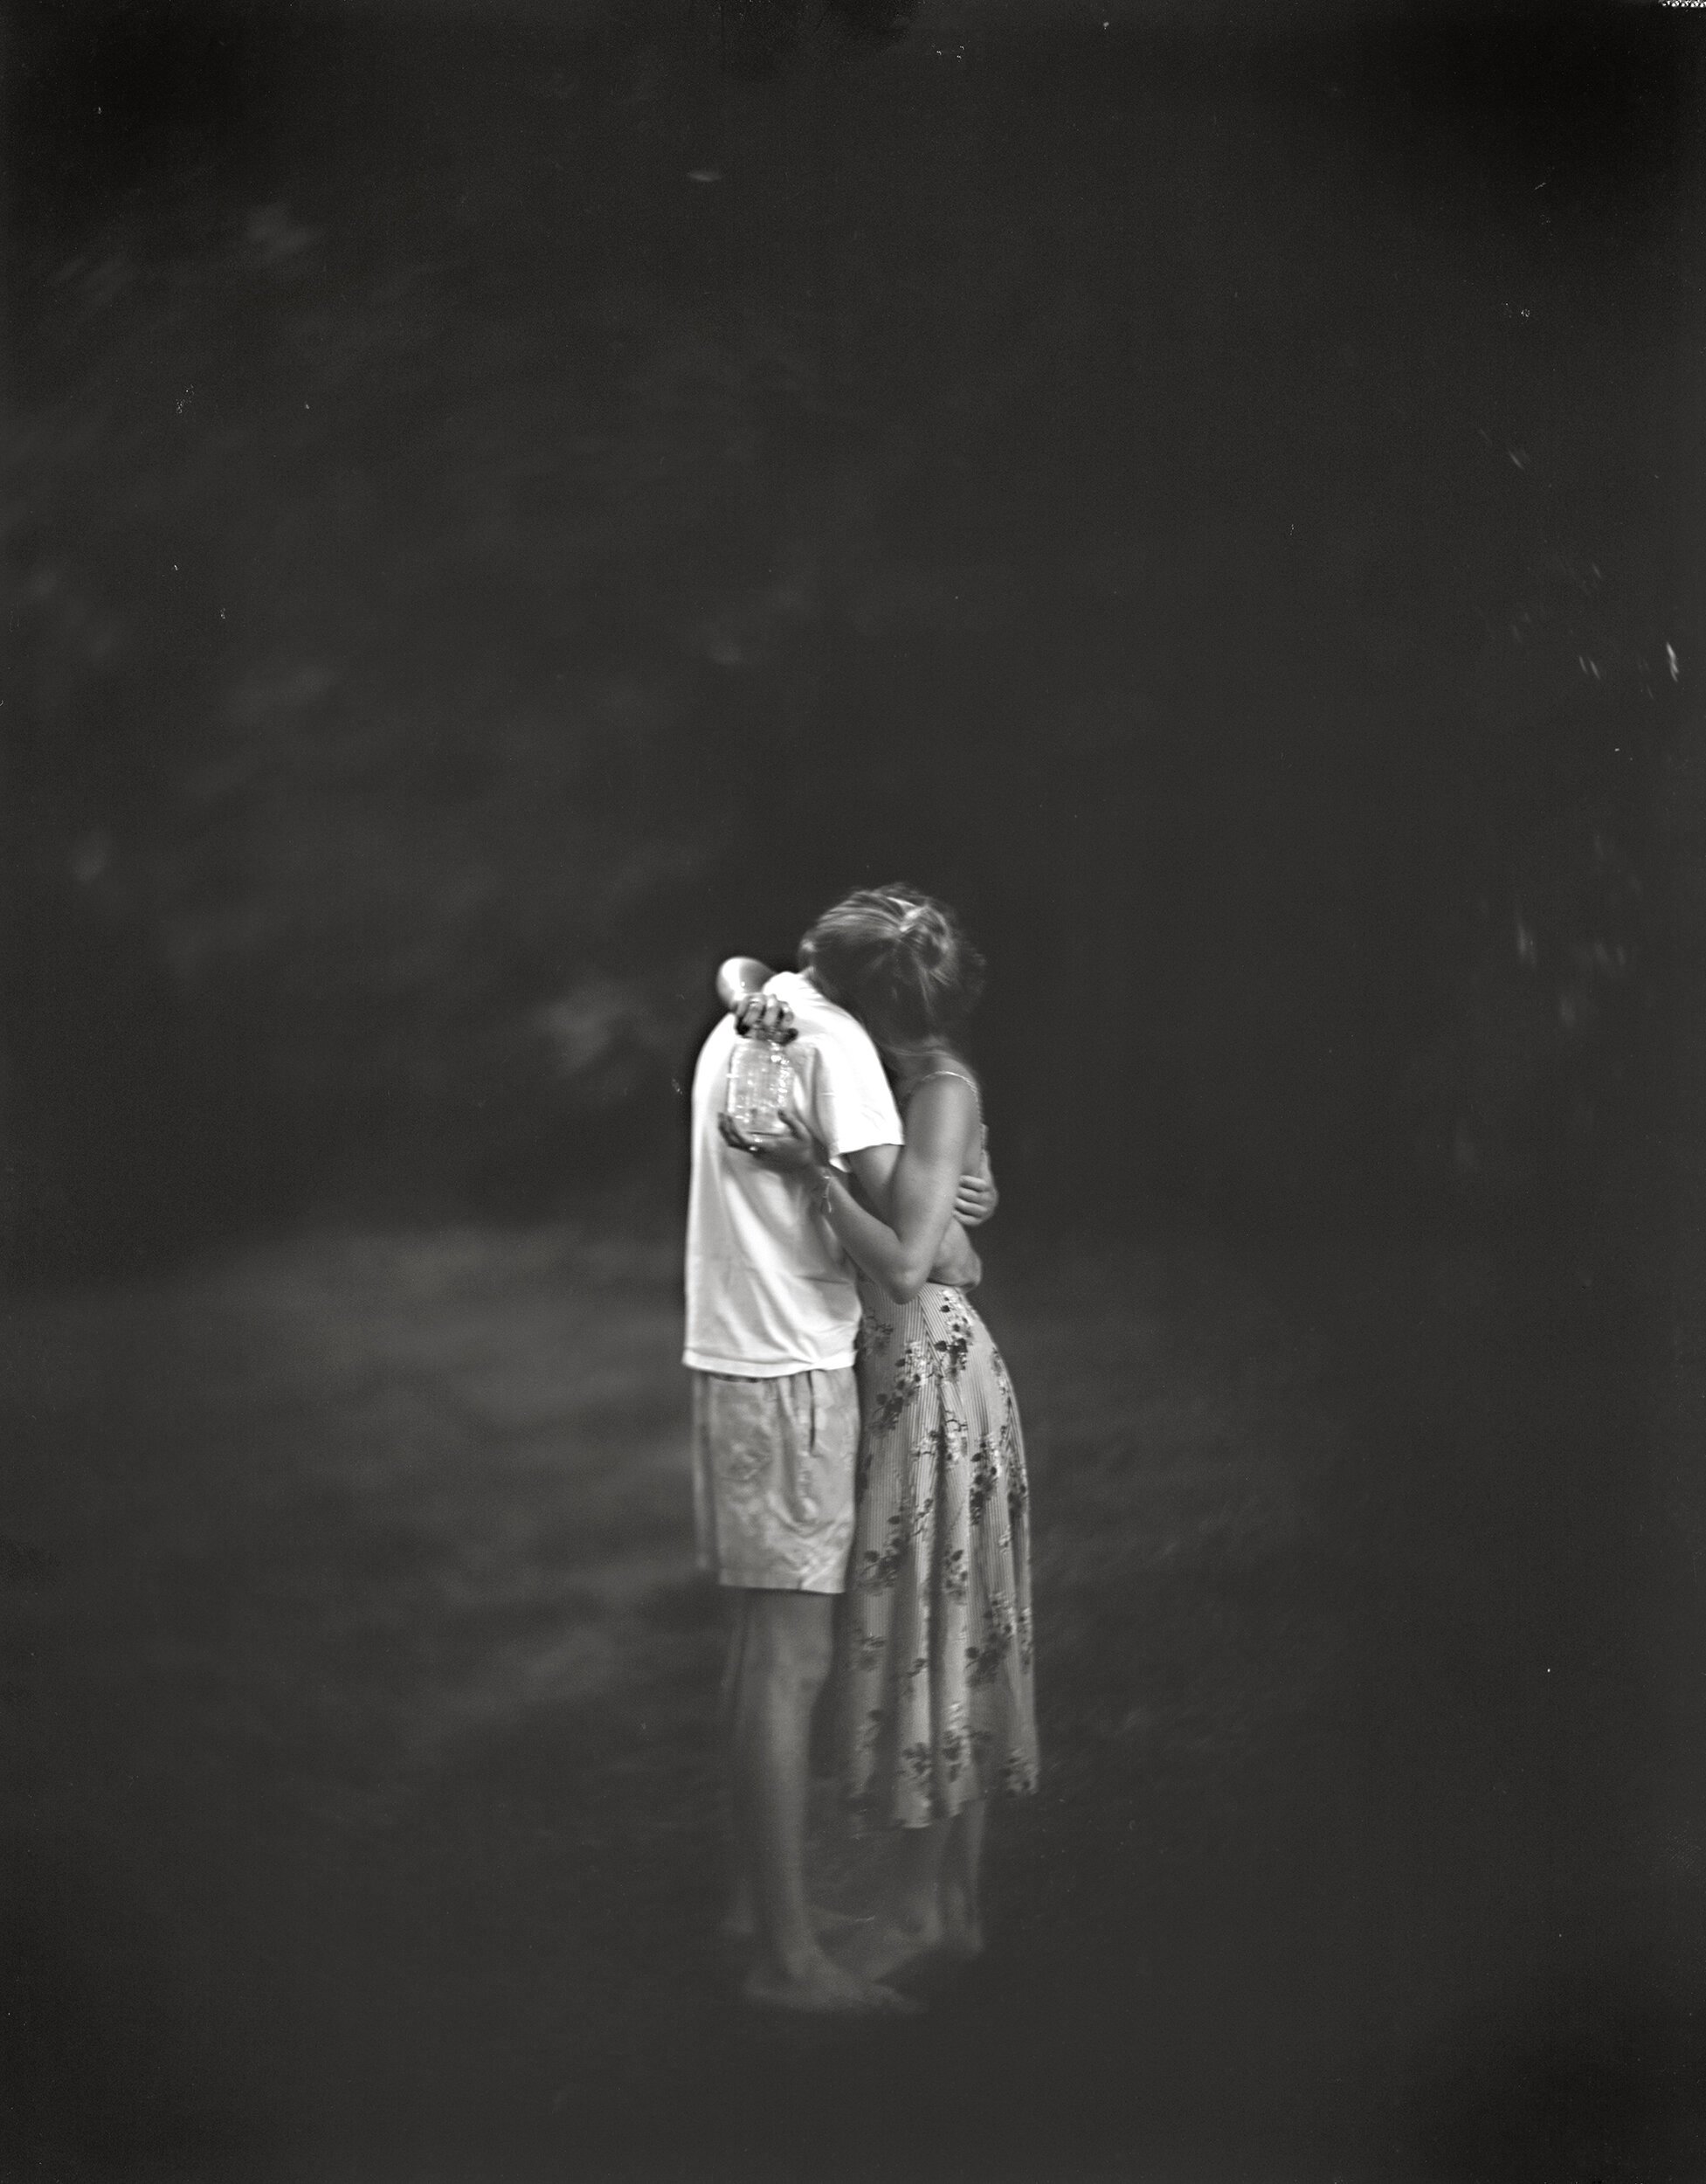  MOONLIGHT, FIREFLIES AND YOUNG LOVE, 2017  In honor of Keith Carter  GELATIN SILVER PHOTOGRAPH   